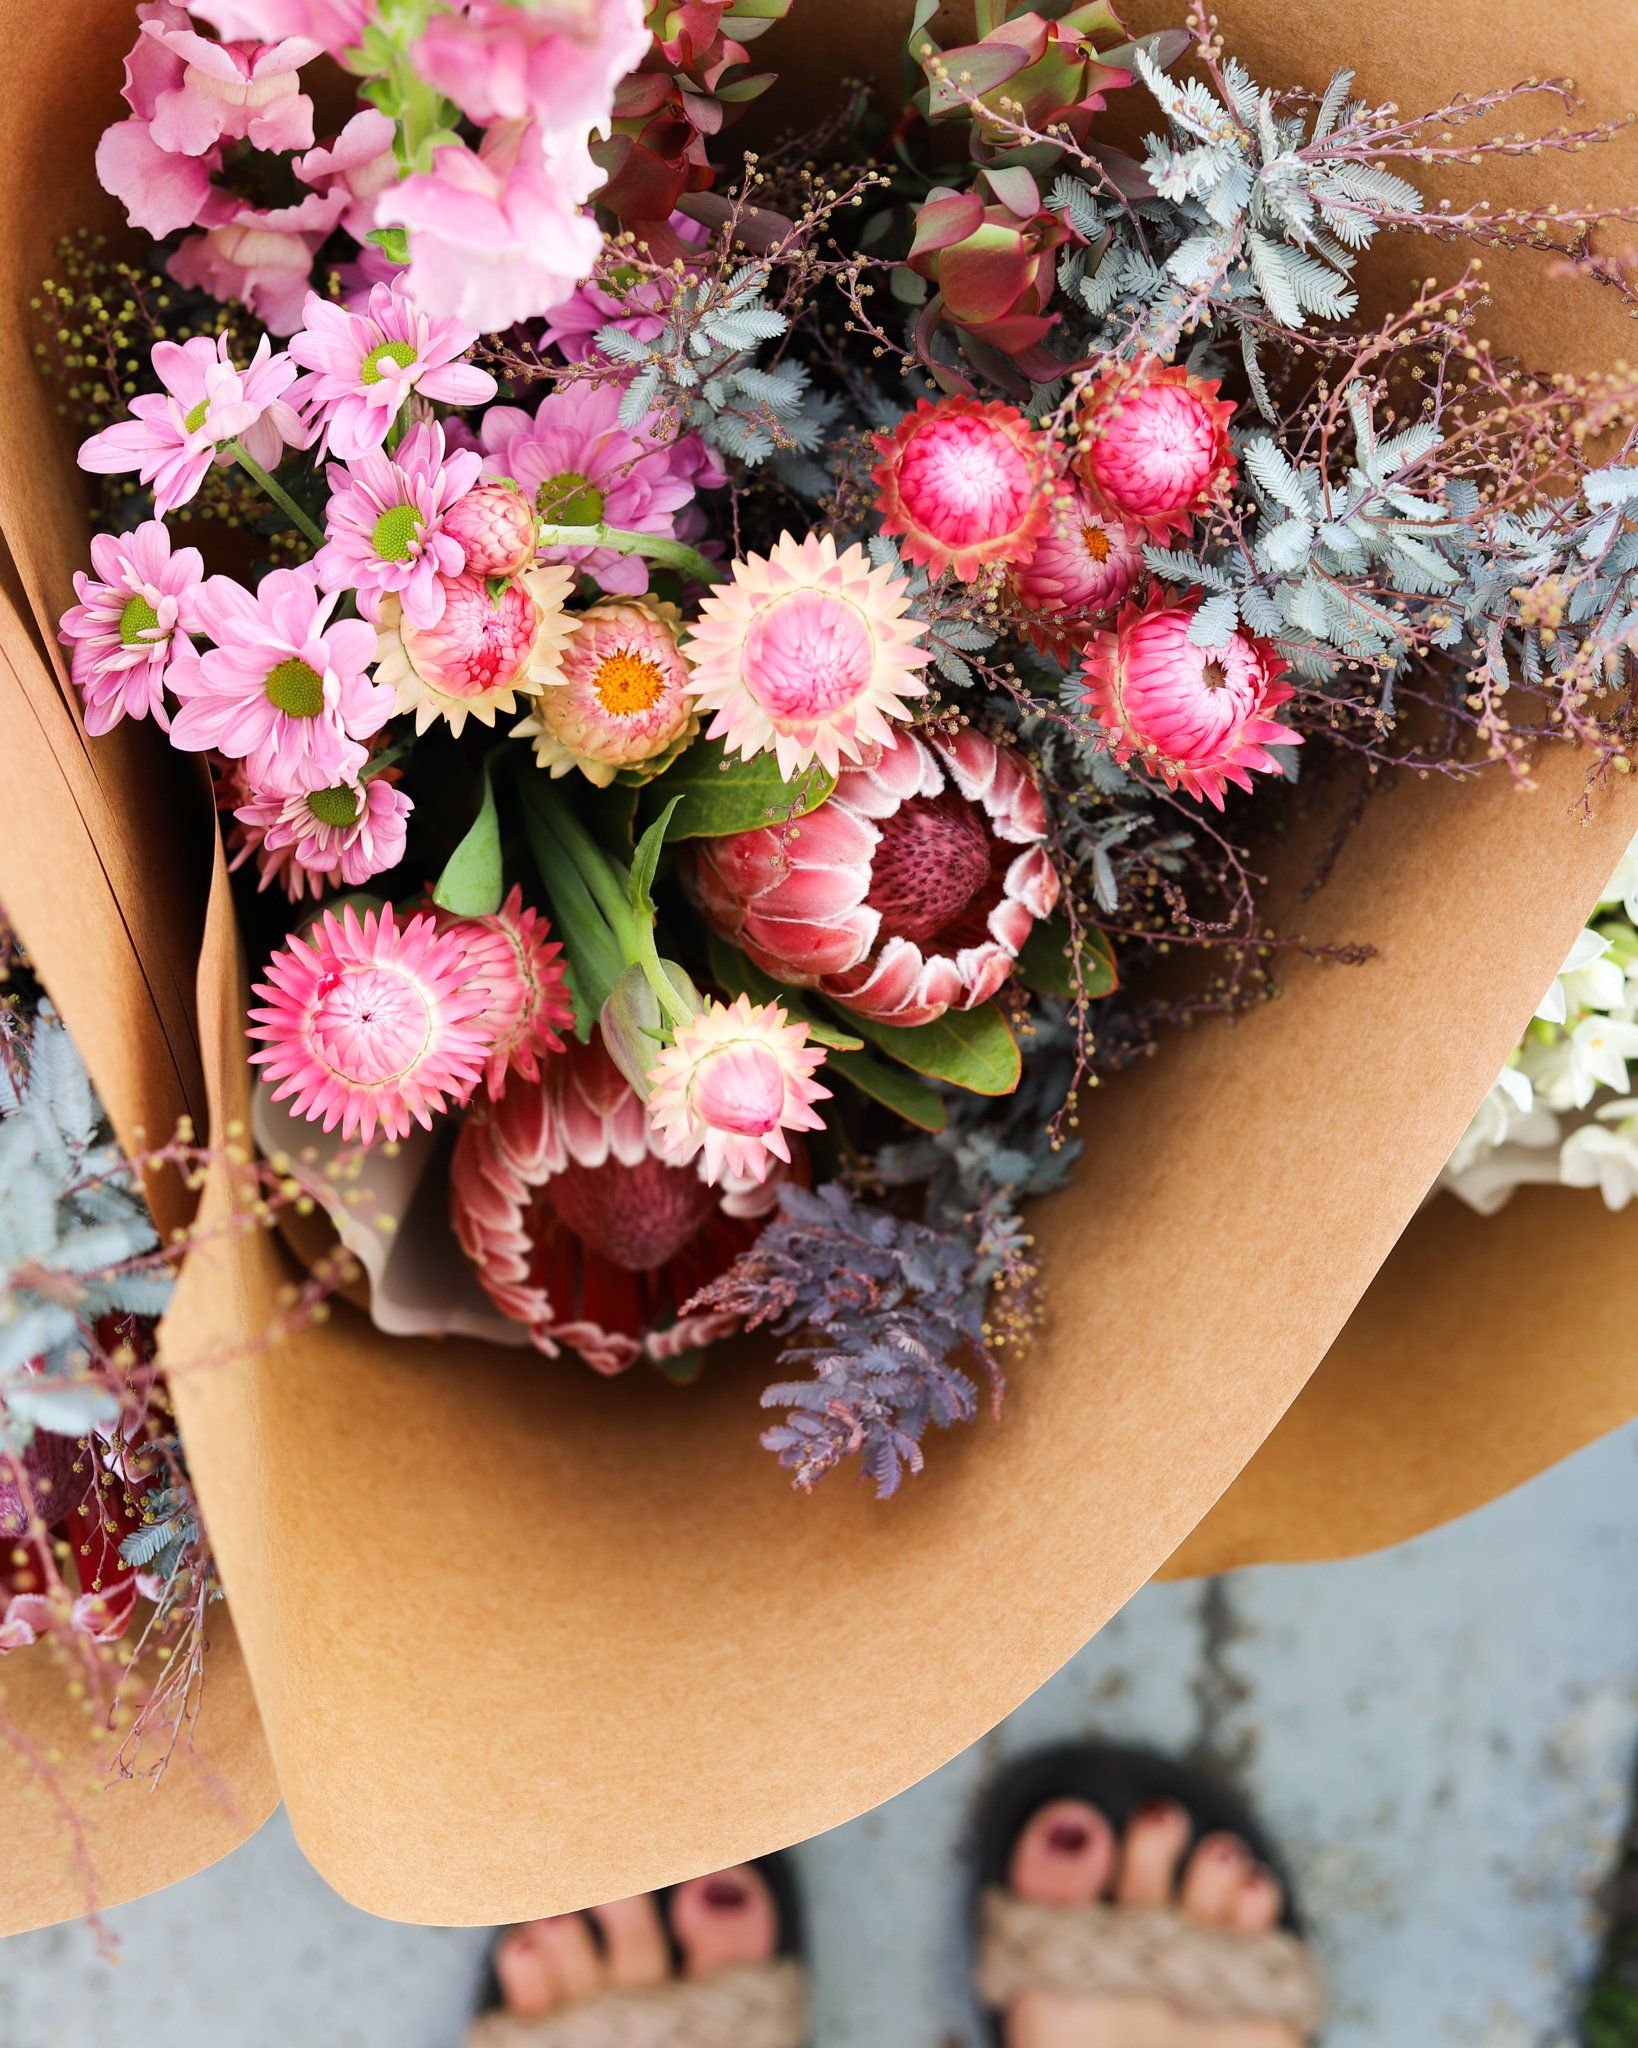 Hands up in the comments if you're a native flower lover 🙋&zwj;♀️

#TuesdayPosy #NewcastleFlorist #NewcastleFlowerDelivery #Florist #Posy